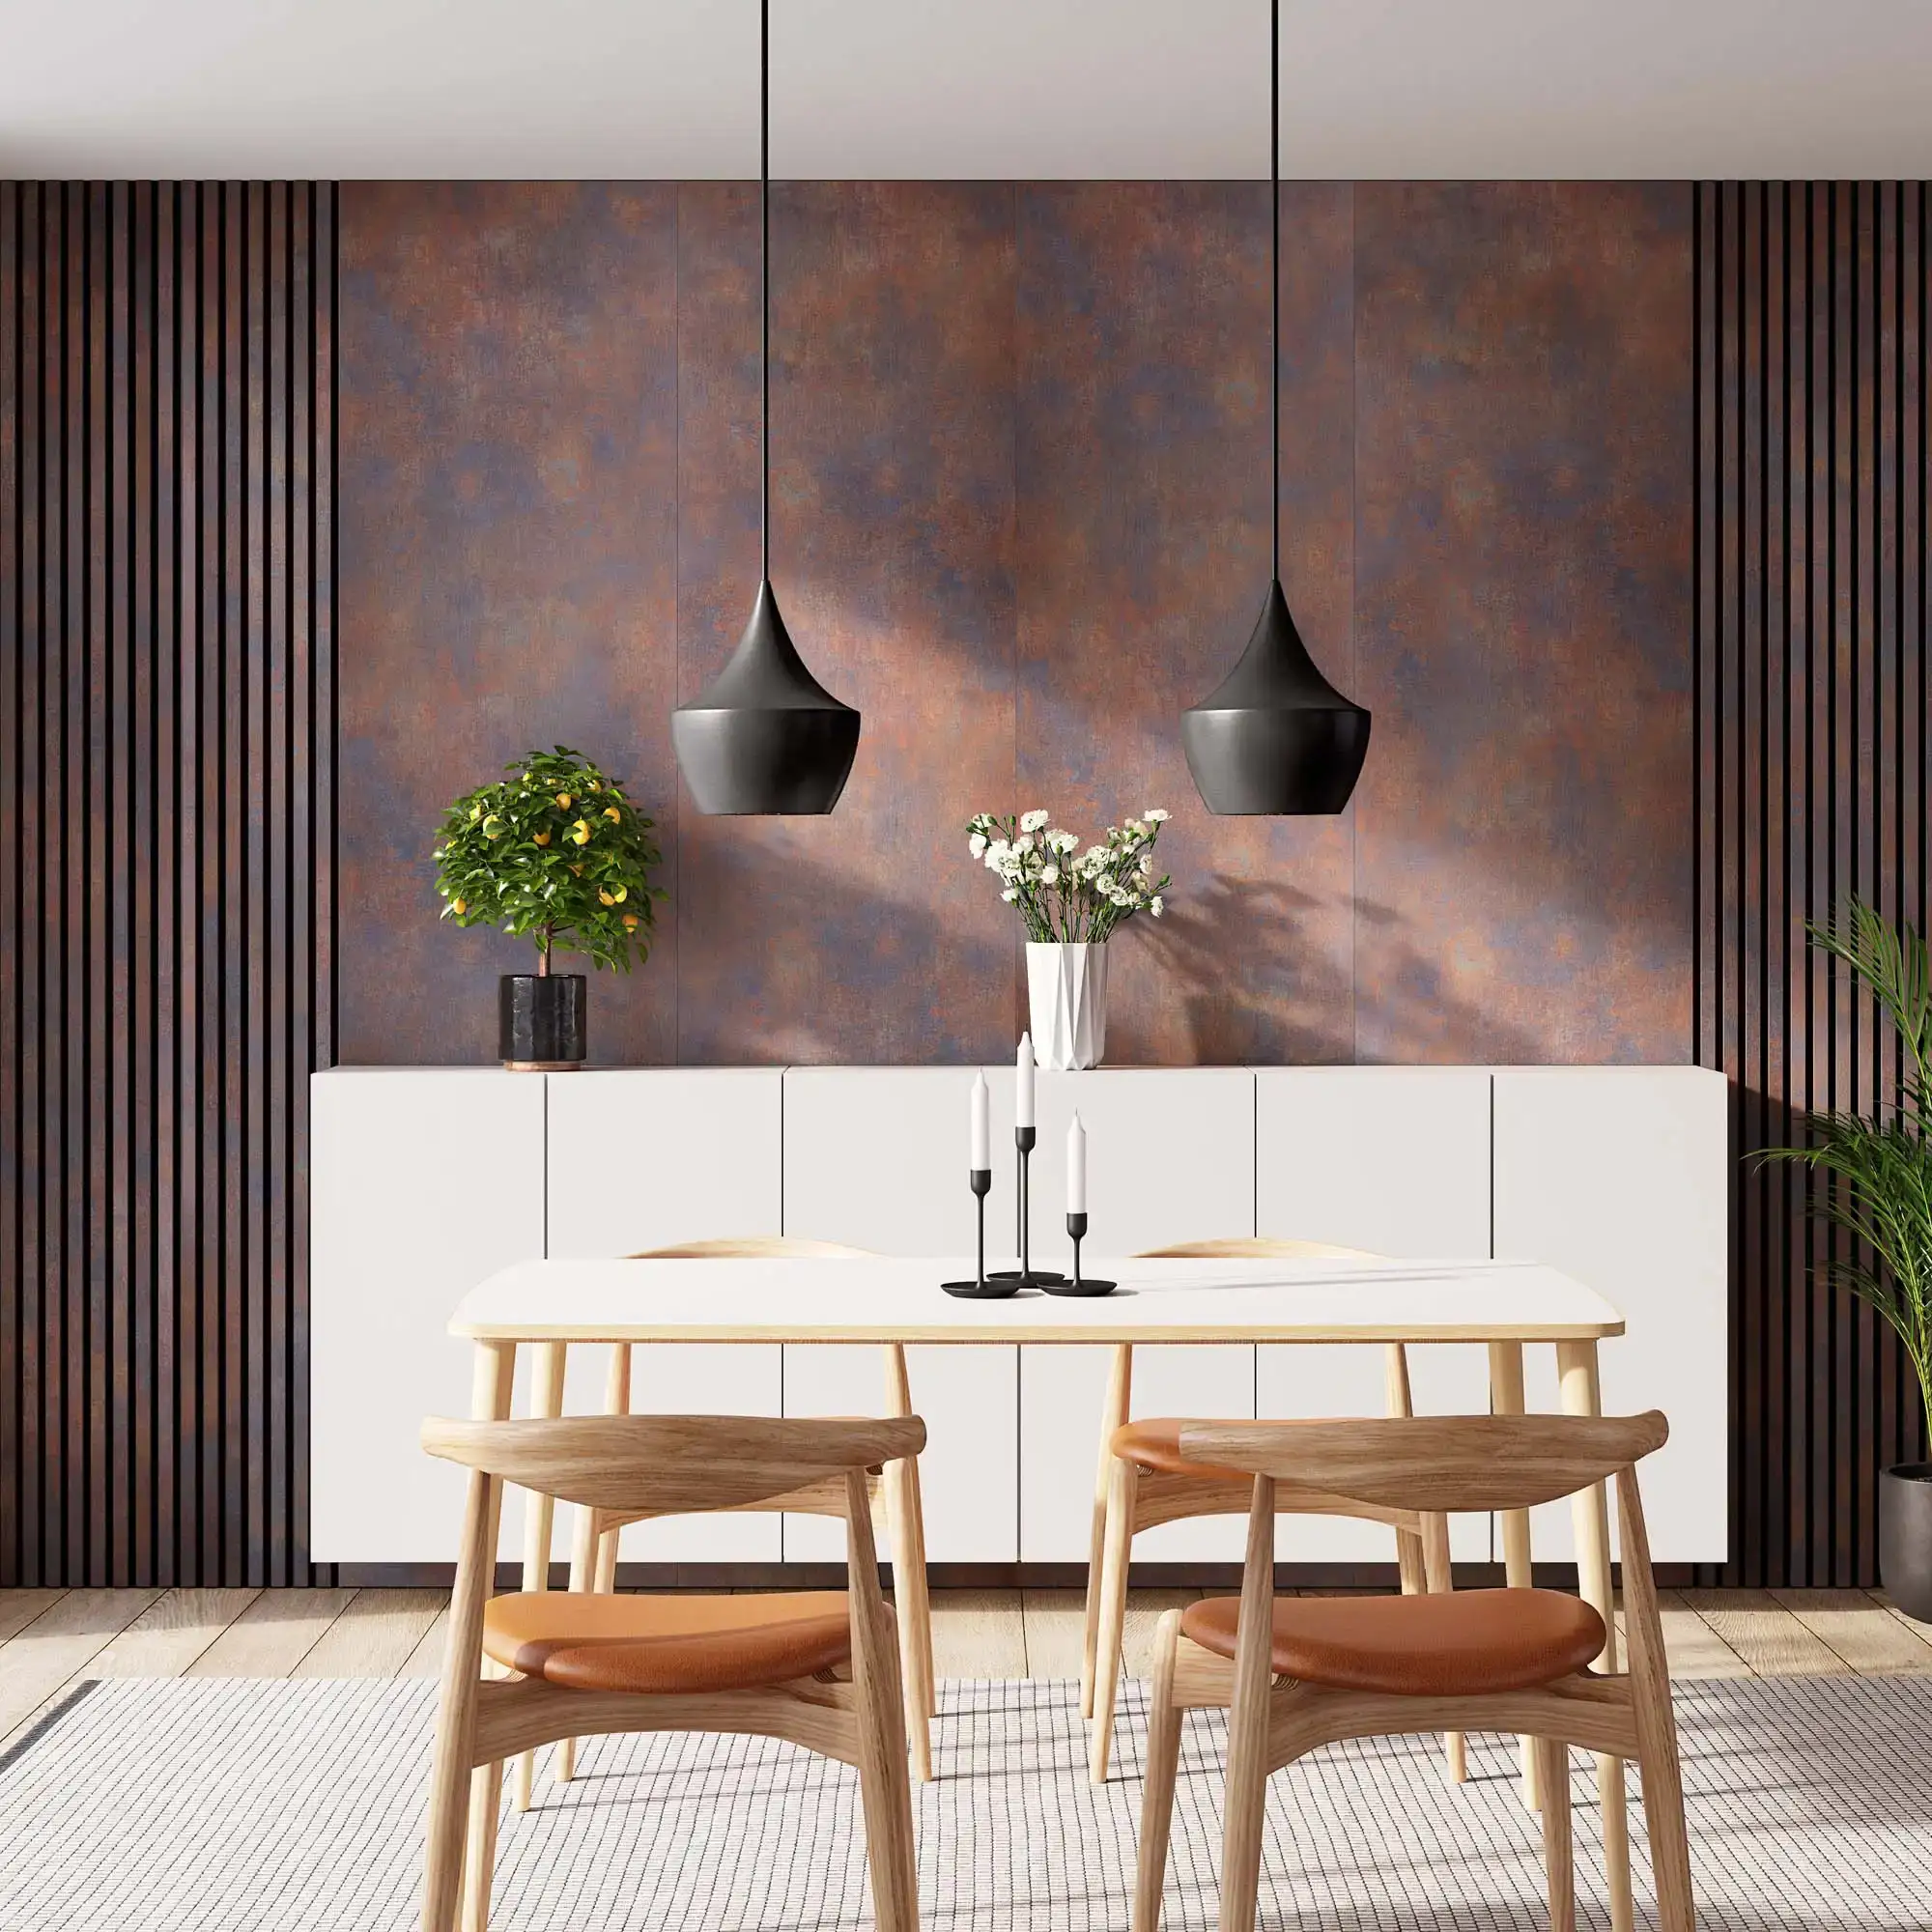 WS Corten and Ribbon-Design Corten with Black RecoSilent in dining room